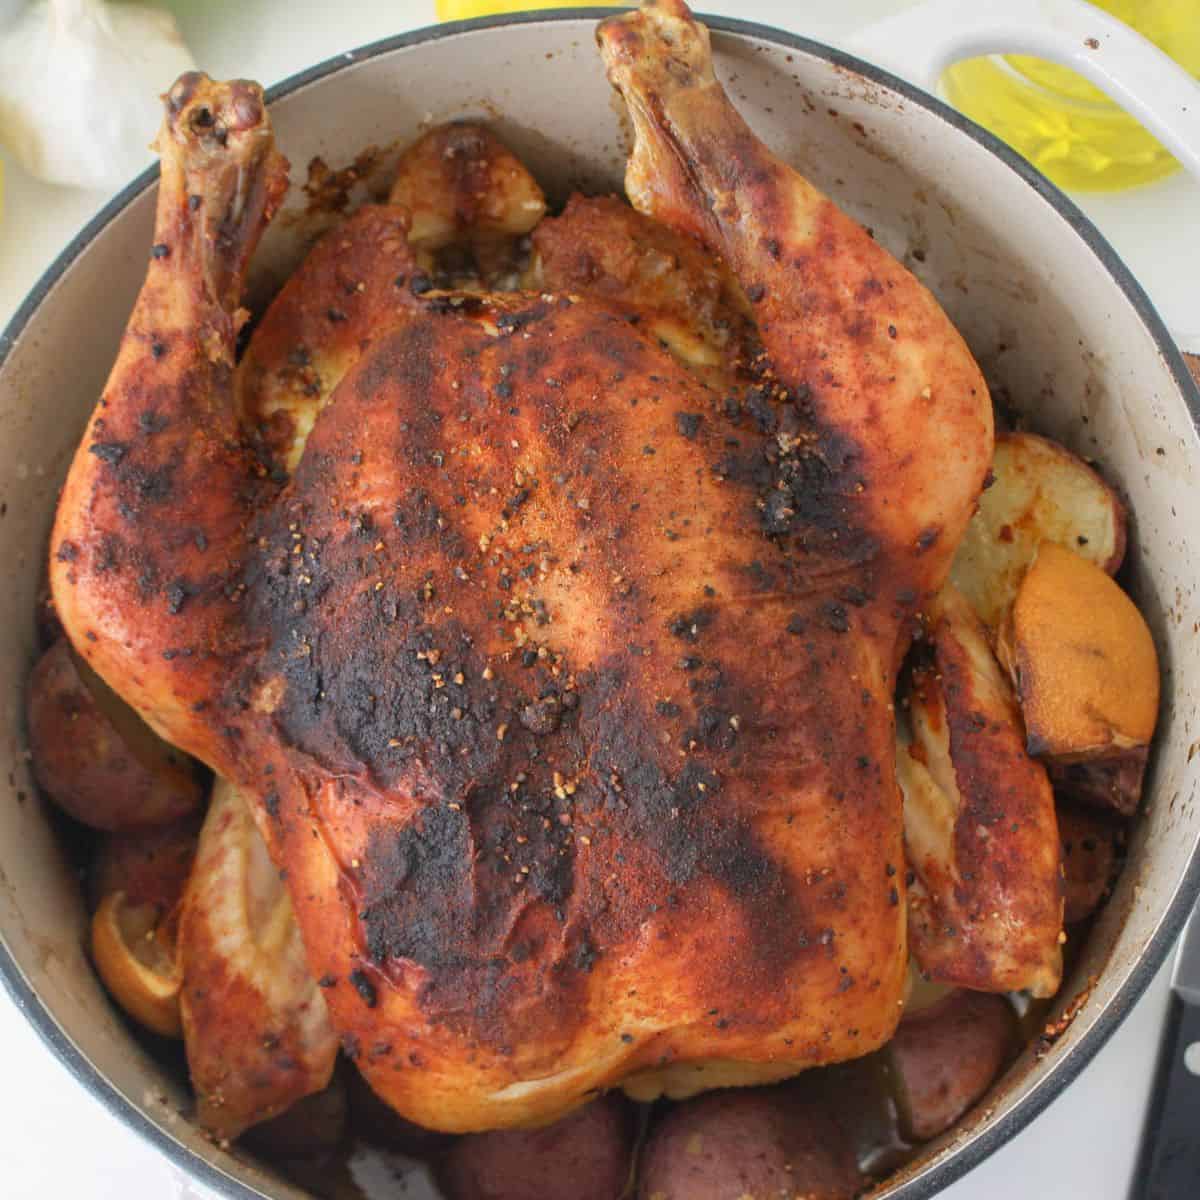 A roasted chicken and potatoes made in the Dutch oven.